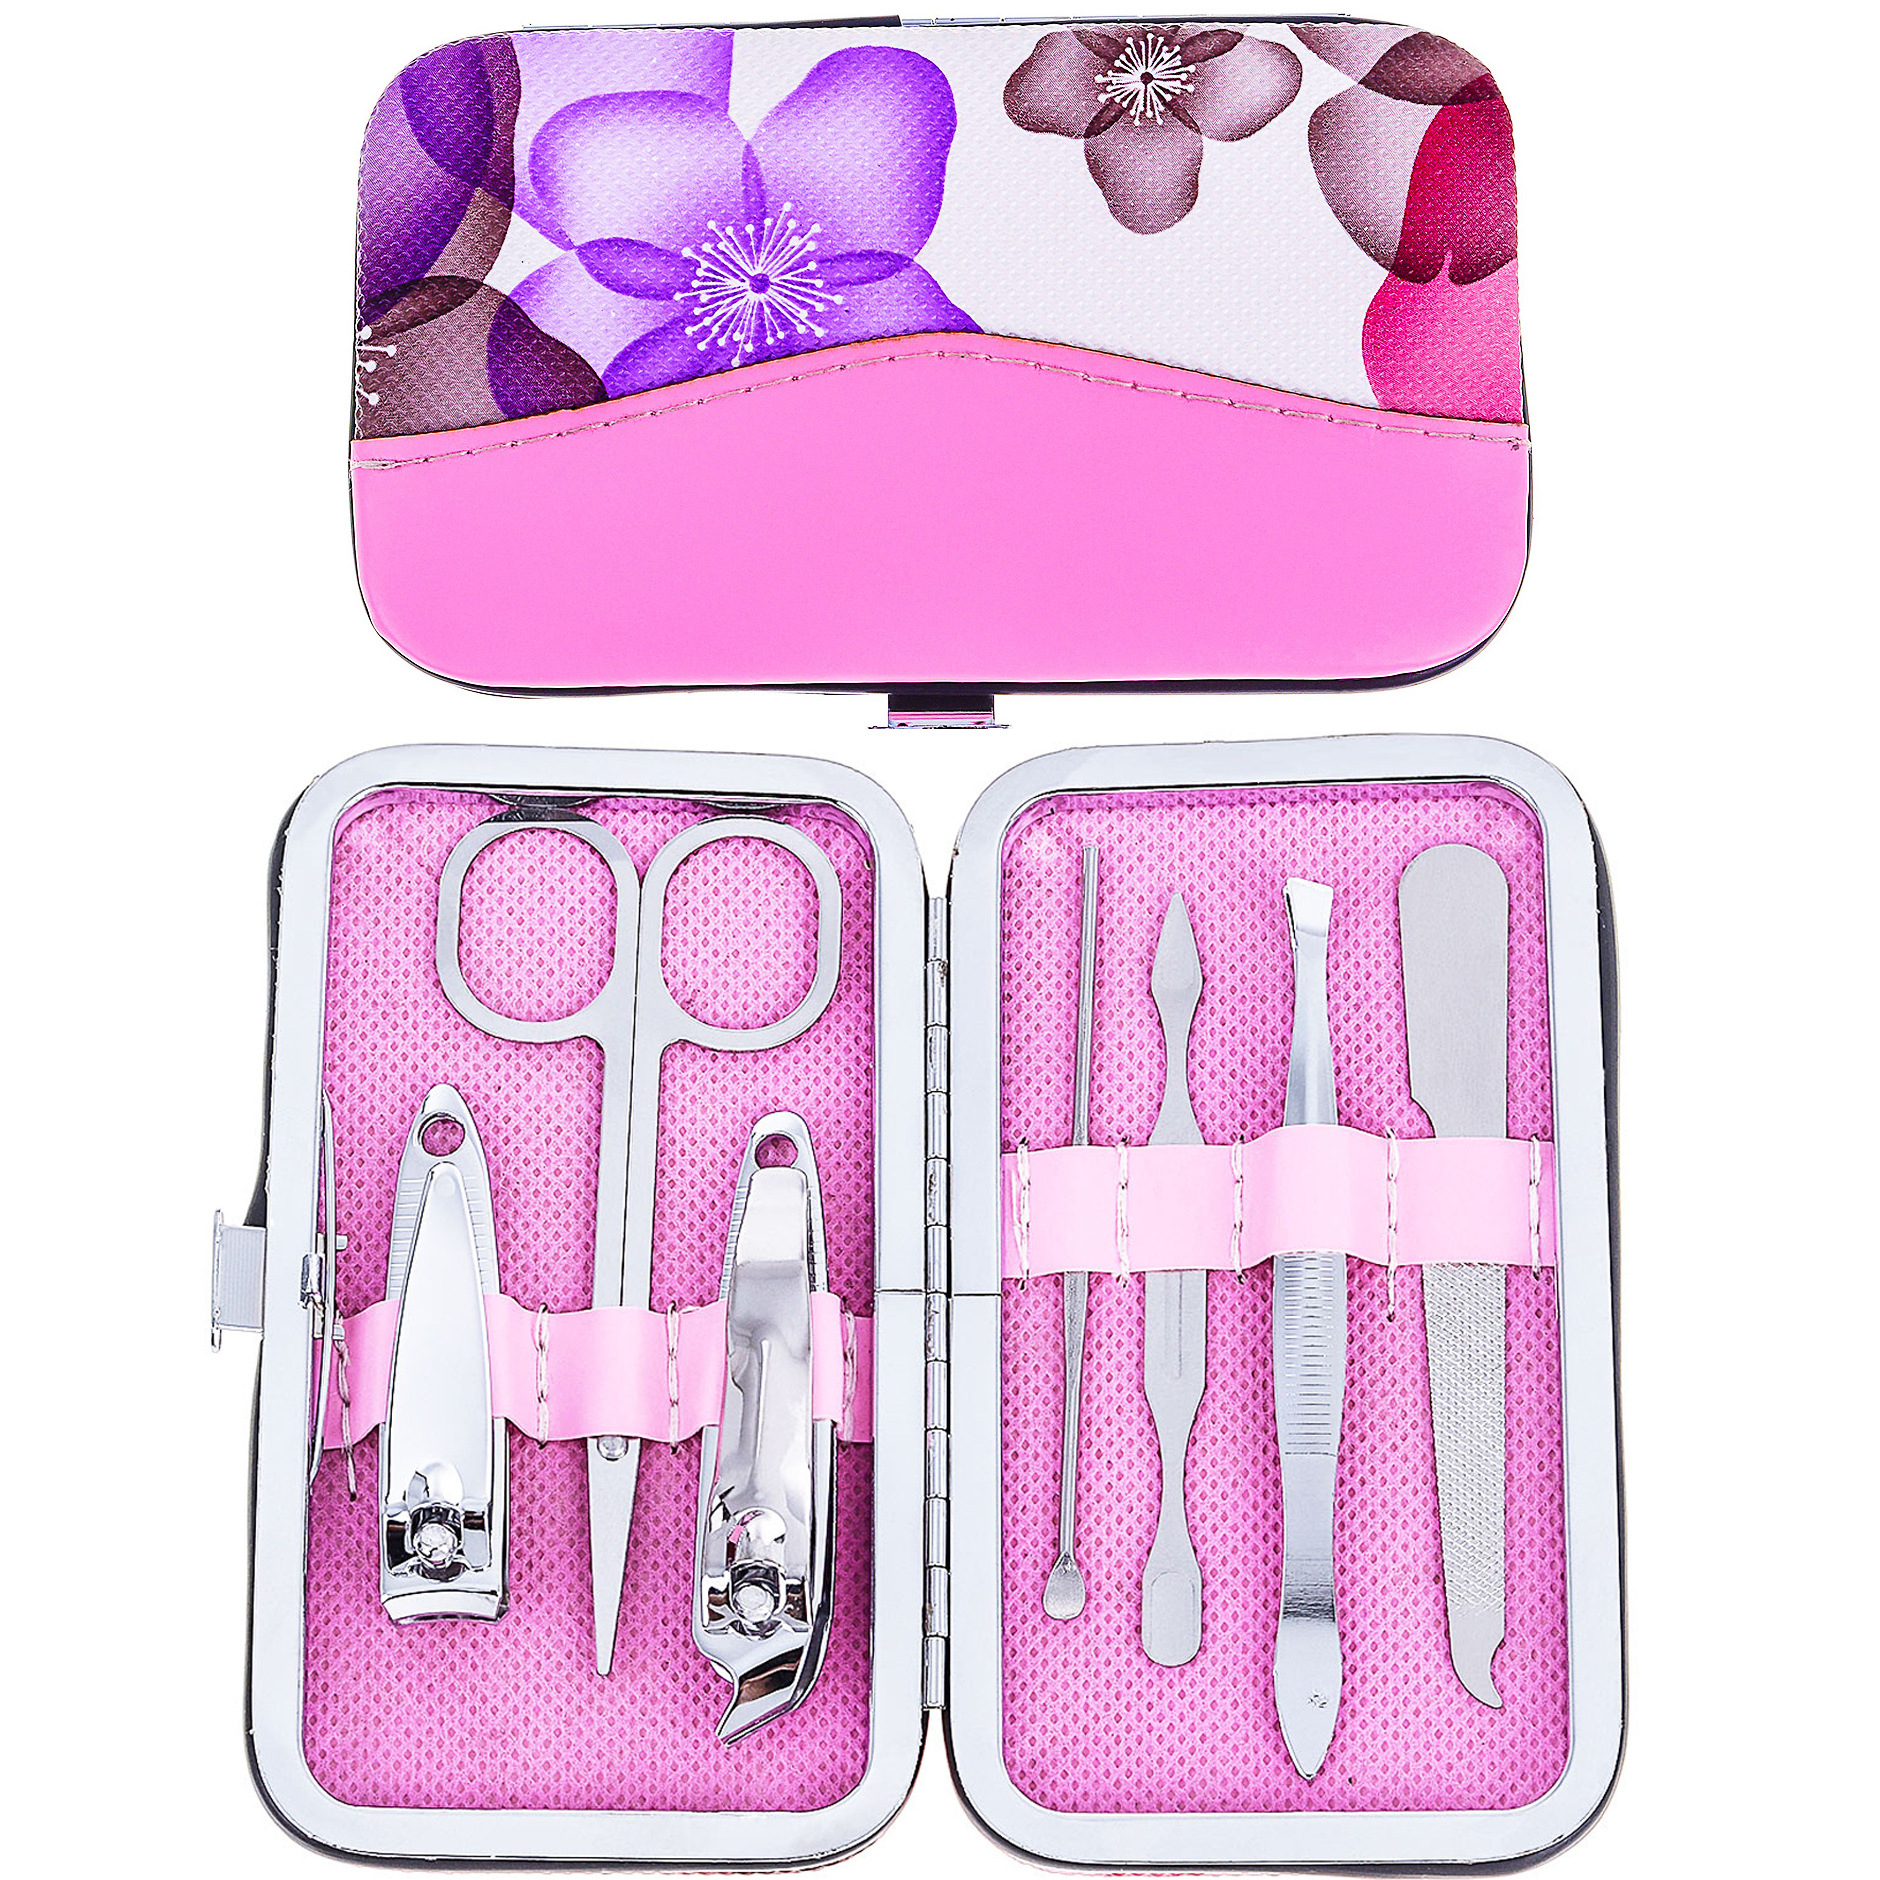 Factory spot beauty tools seven gift set carbon steel nail clippers scissors manicure manicure nail clippers set